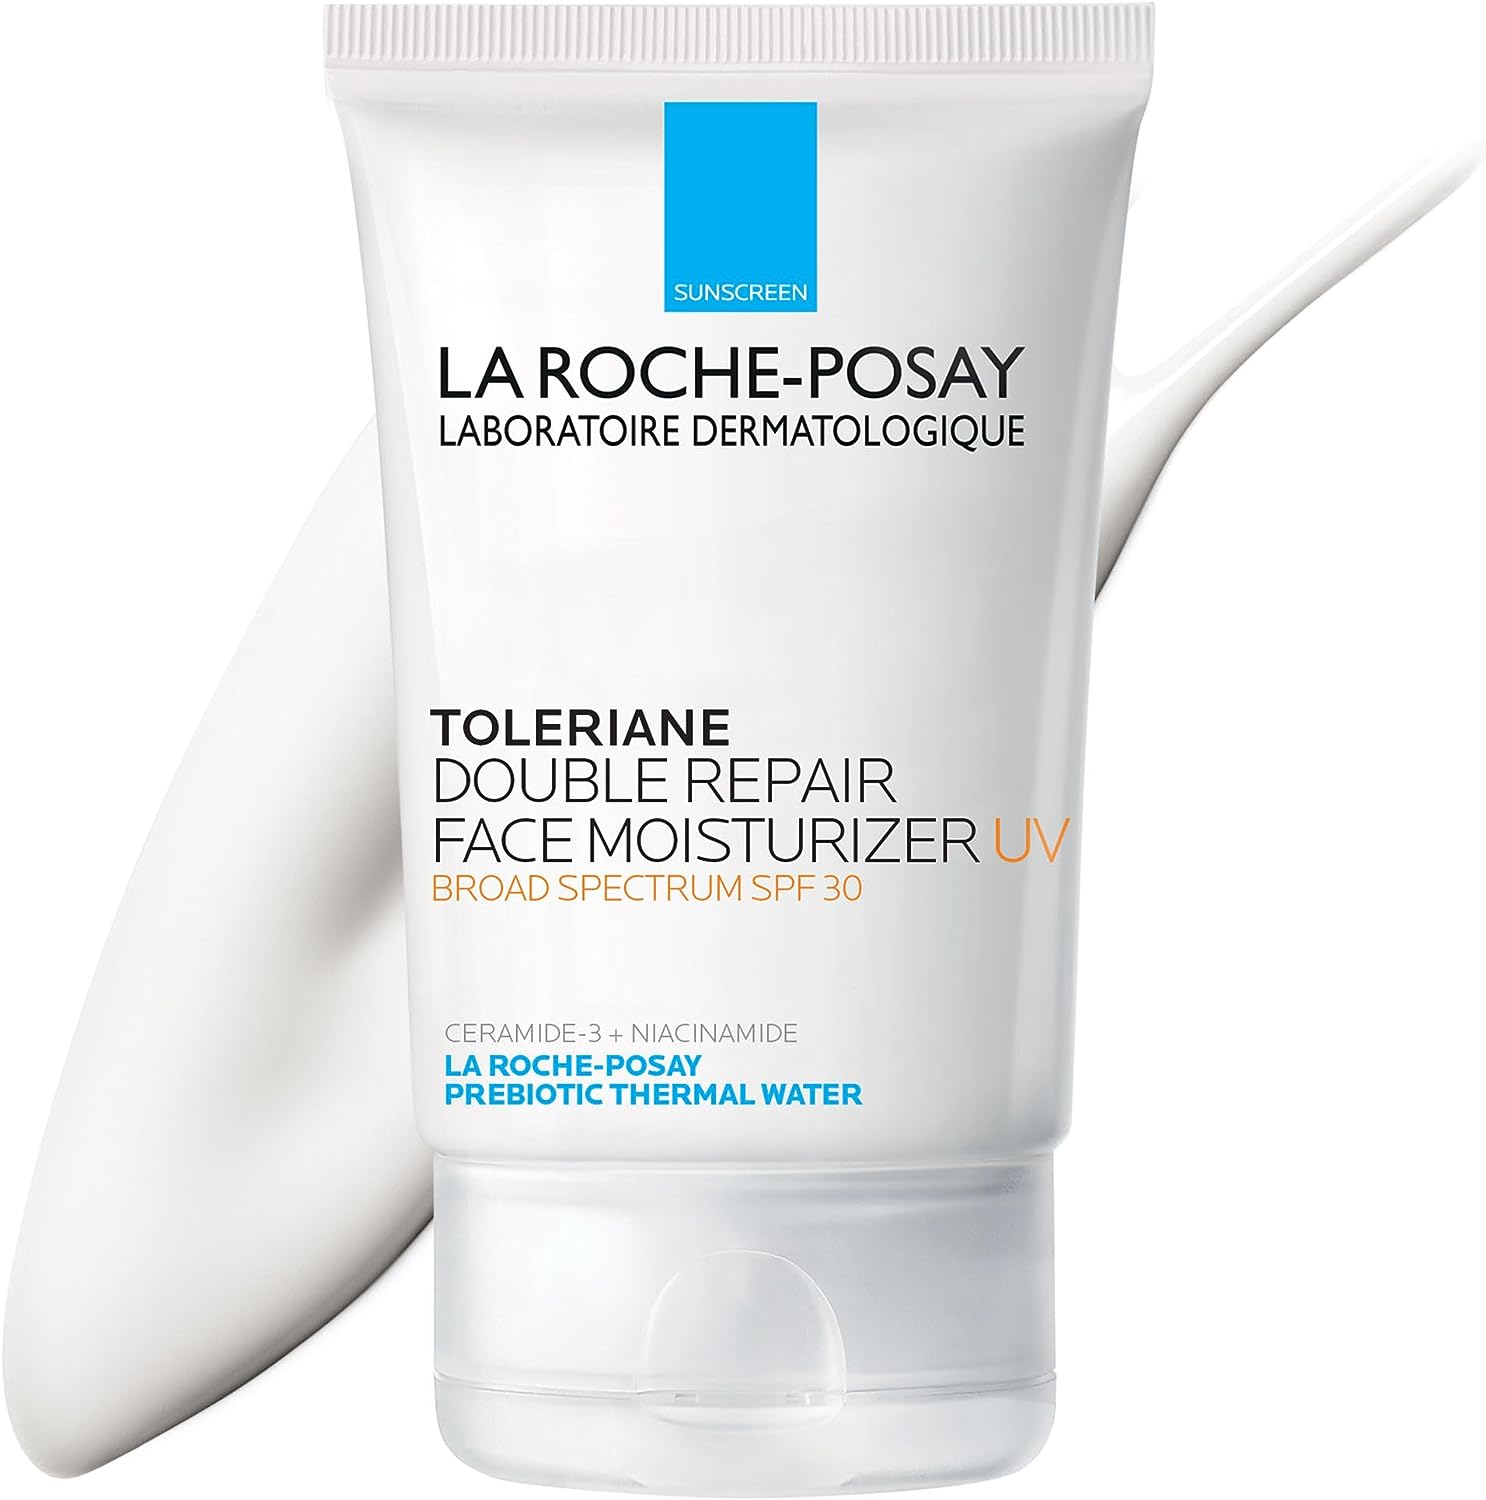 La Roche-Posay Toleriane Double Repair Uv Face Moisturizer With Spf, Daily Facial Moisturizer With Ceramide And Niacinamide For All Skin Types, Sunscreen Spf 30, Oil Free, Fragrance Free, 1 Piece